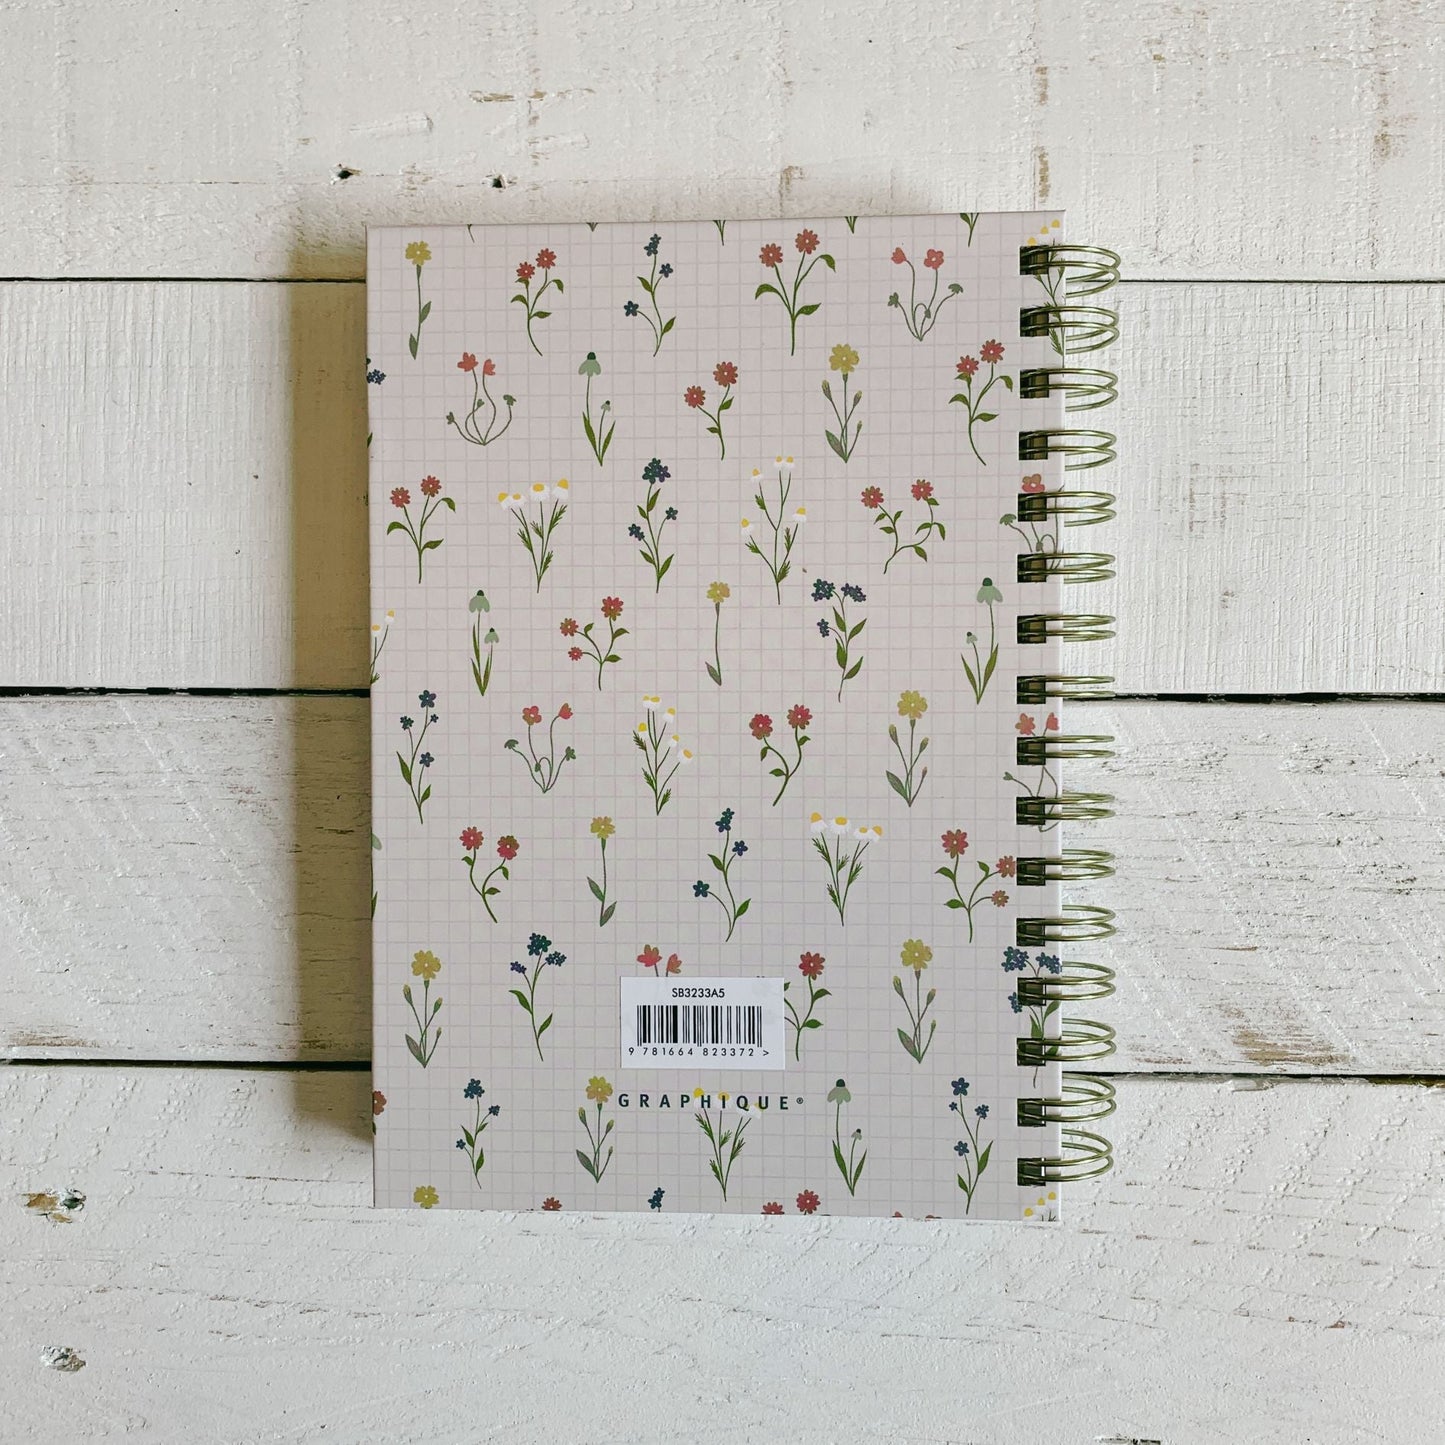 Take Time For Yourself Dainty Floral Spiral Hard Cover Journal | 160 Ruled Pages Spiral-bound Notebook | 6.25"x 8.25"